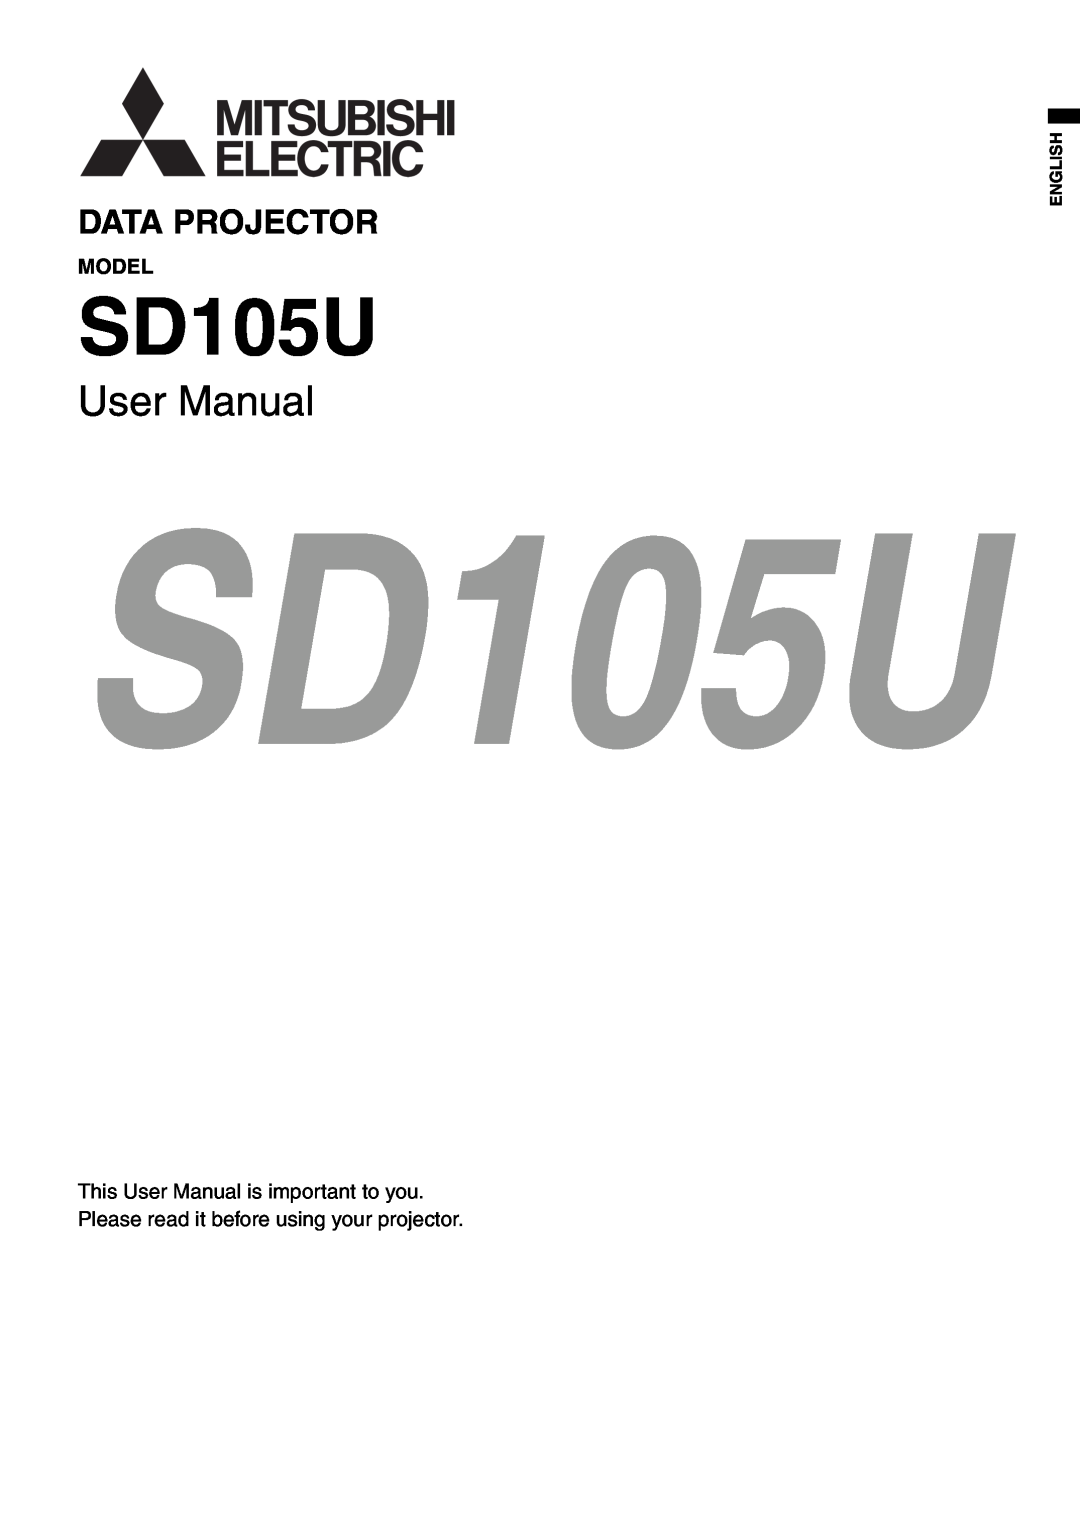 Mitsubishi Electronics SD105U user manual Model, This User Manual is important to you, English, Data Projector 